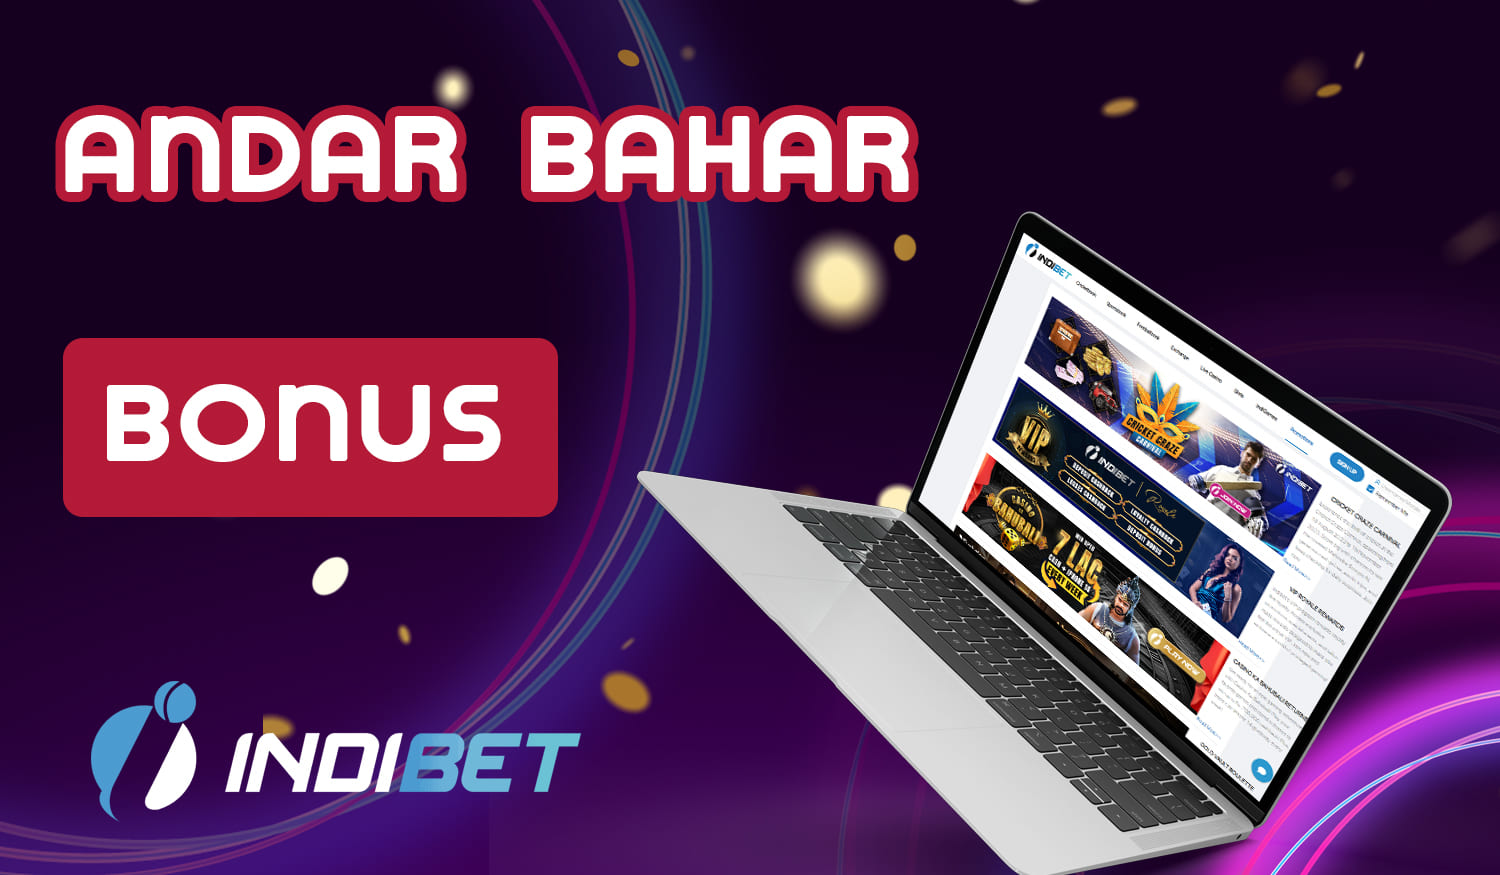 How to get and use bonuses from Indibet India